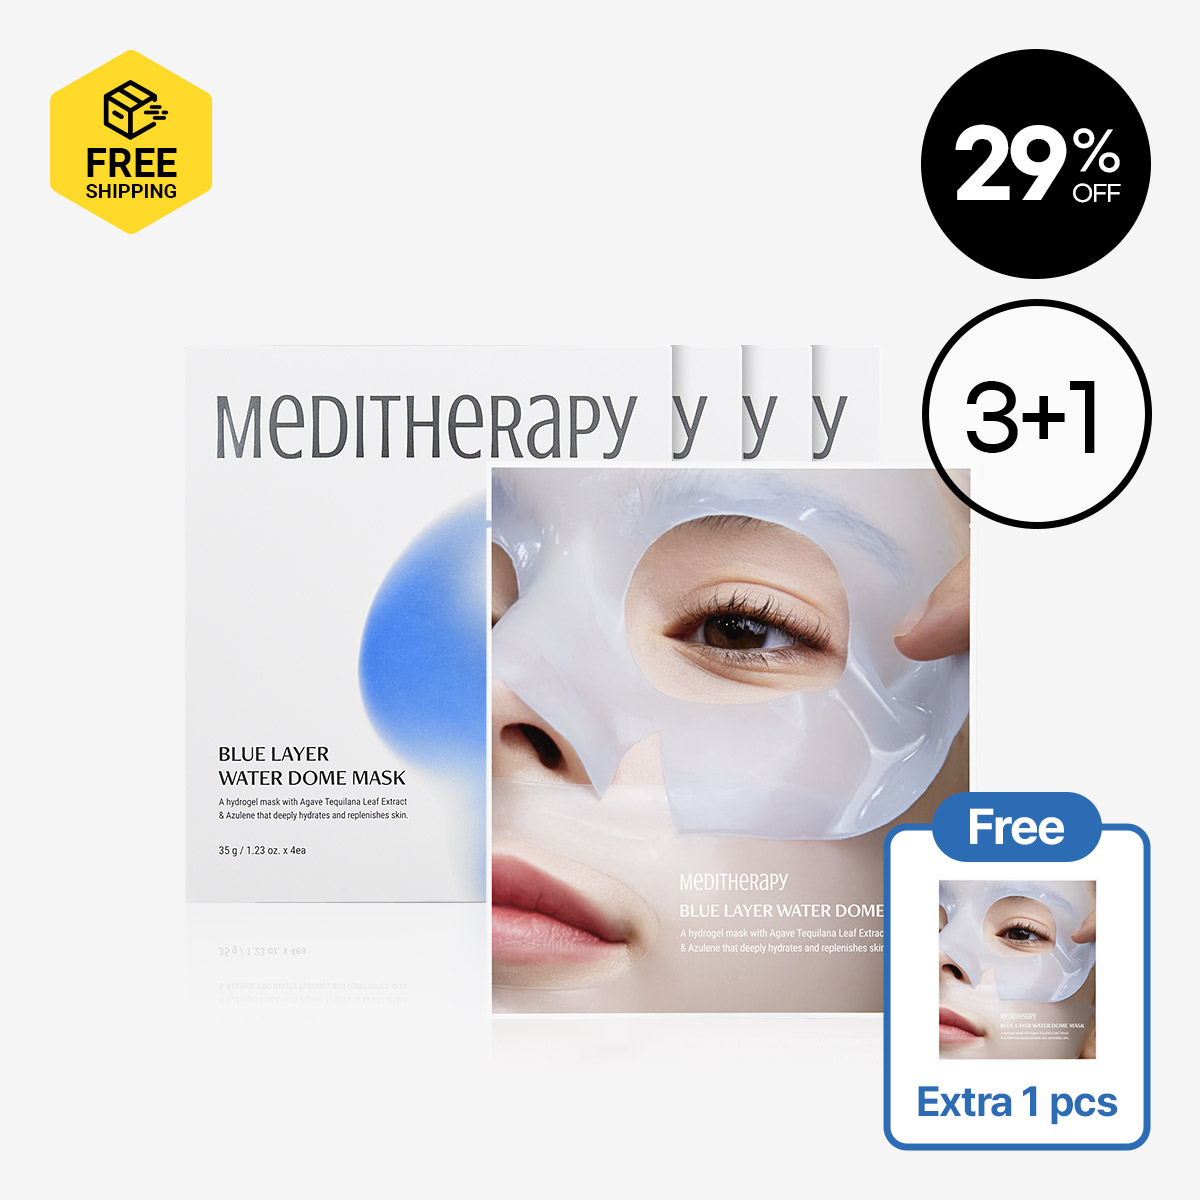 [MEDITHERAPY] Blue Layer Water Dome Mask 3+1